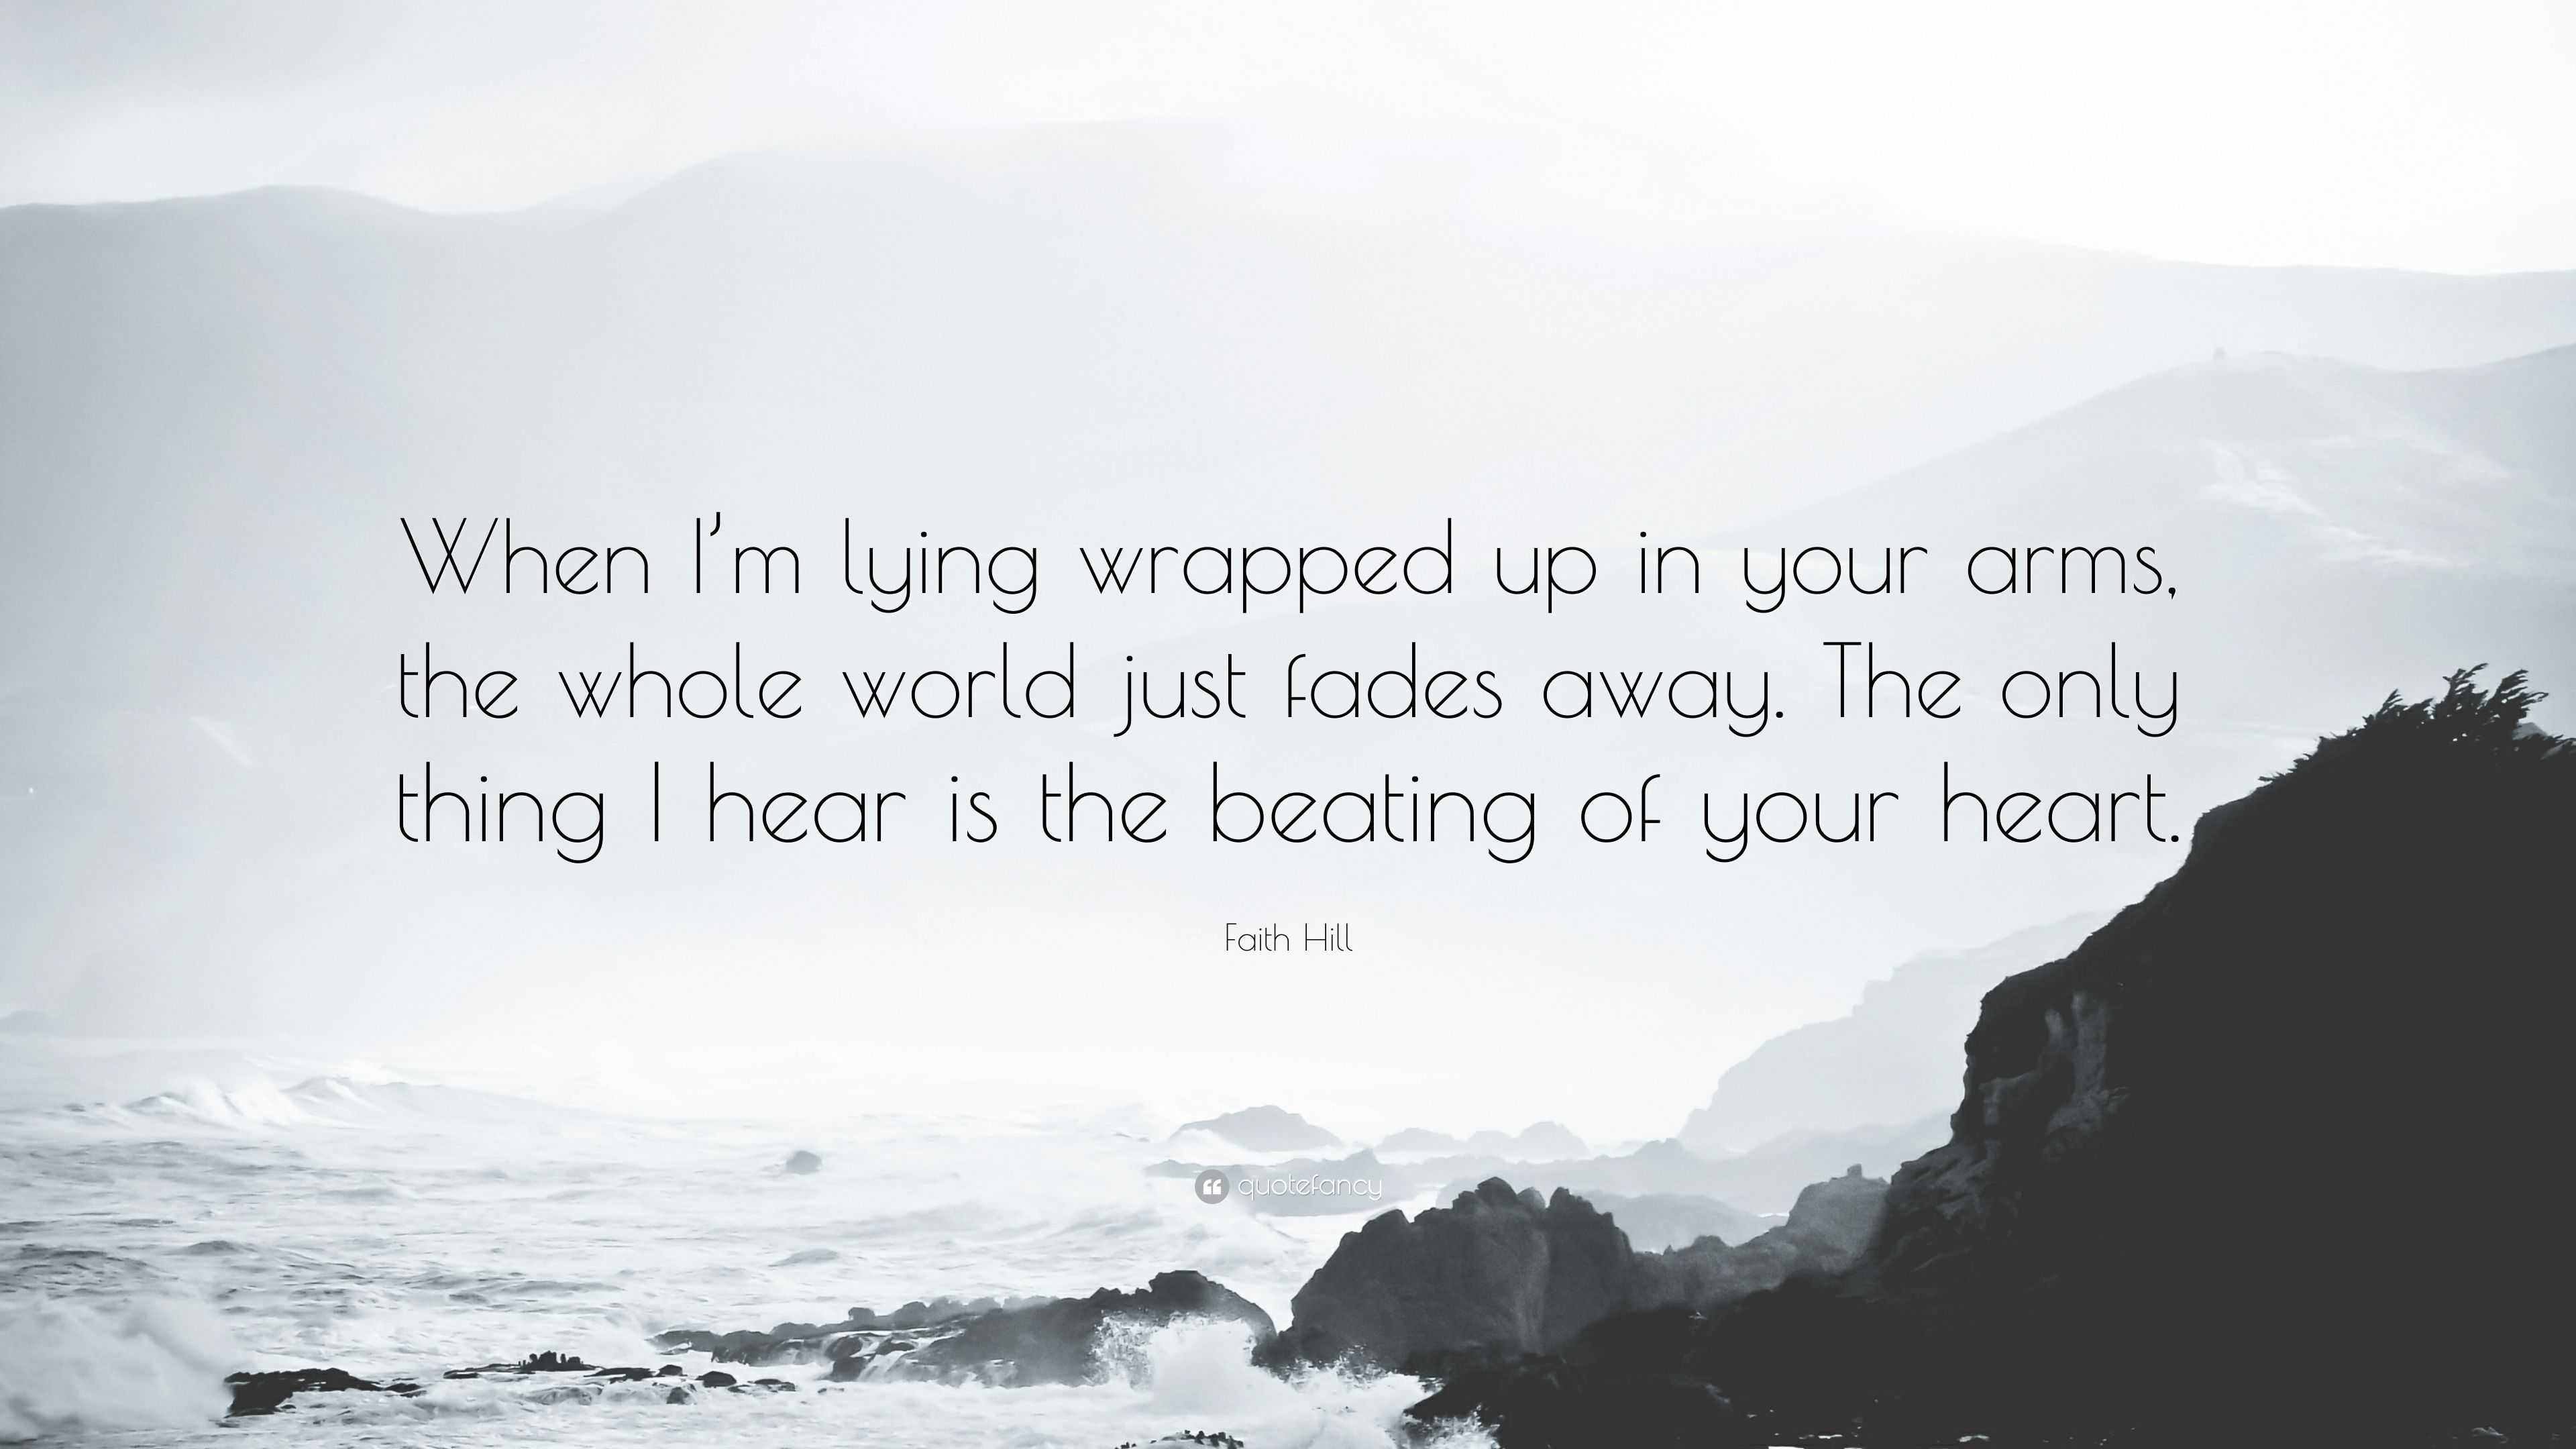 https://quotefancy.com/media/wallpaper/3840x2160/4360729-Faith-Hill-Quote-When-I-m-lying-wrapped-up-in-your-arms-the-whole.jpg